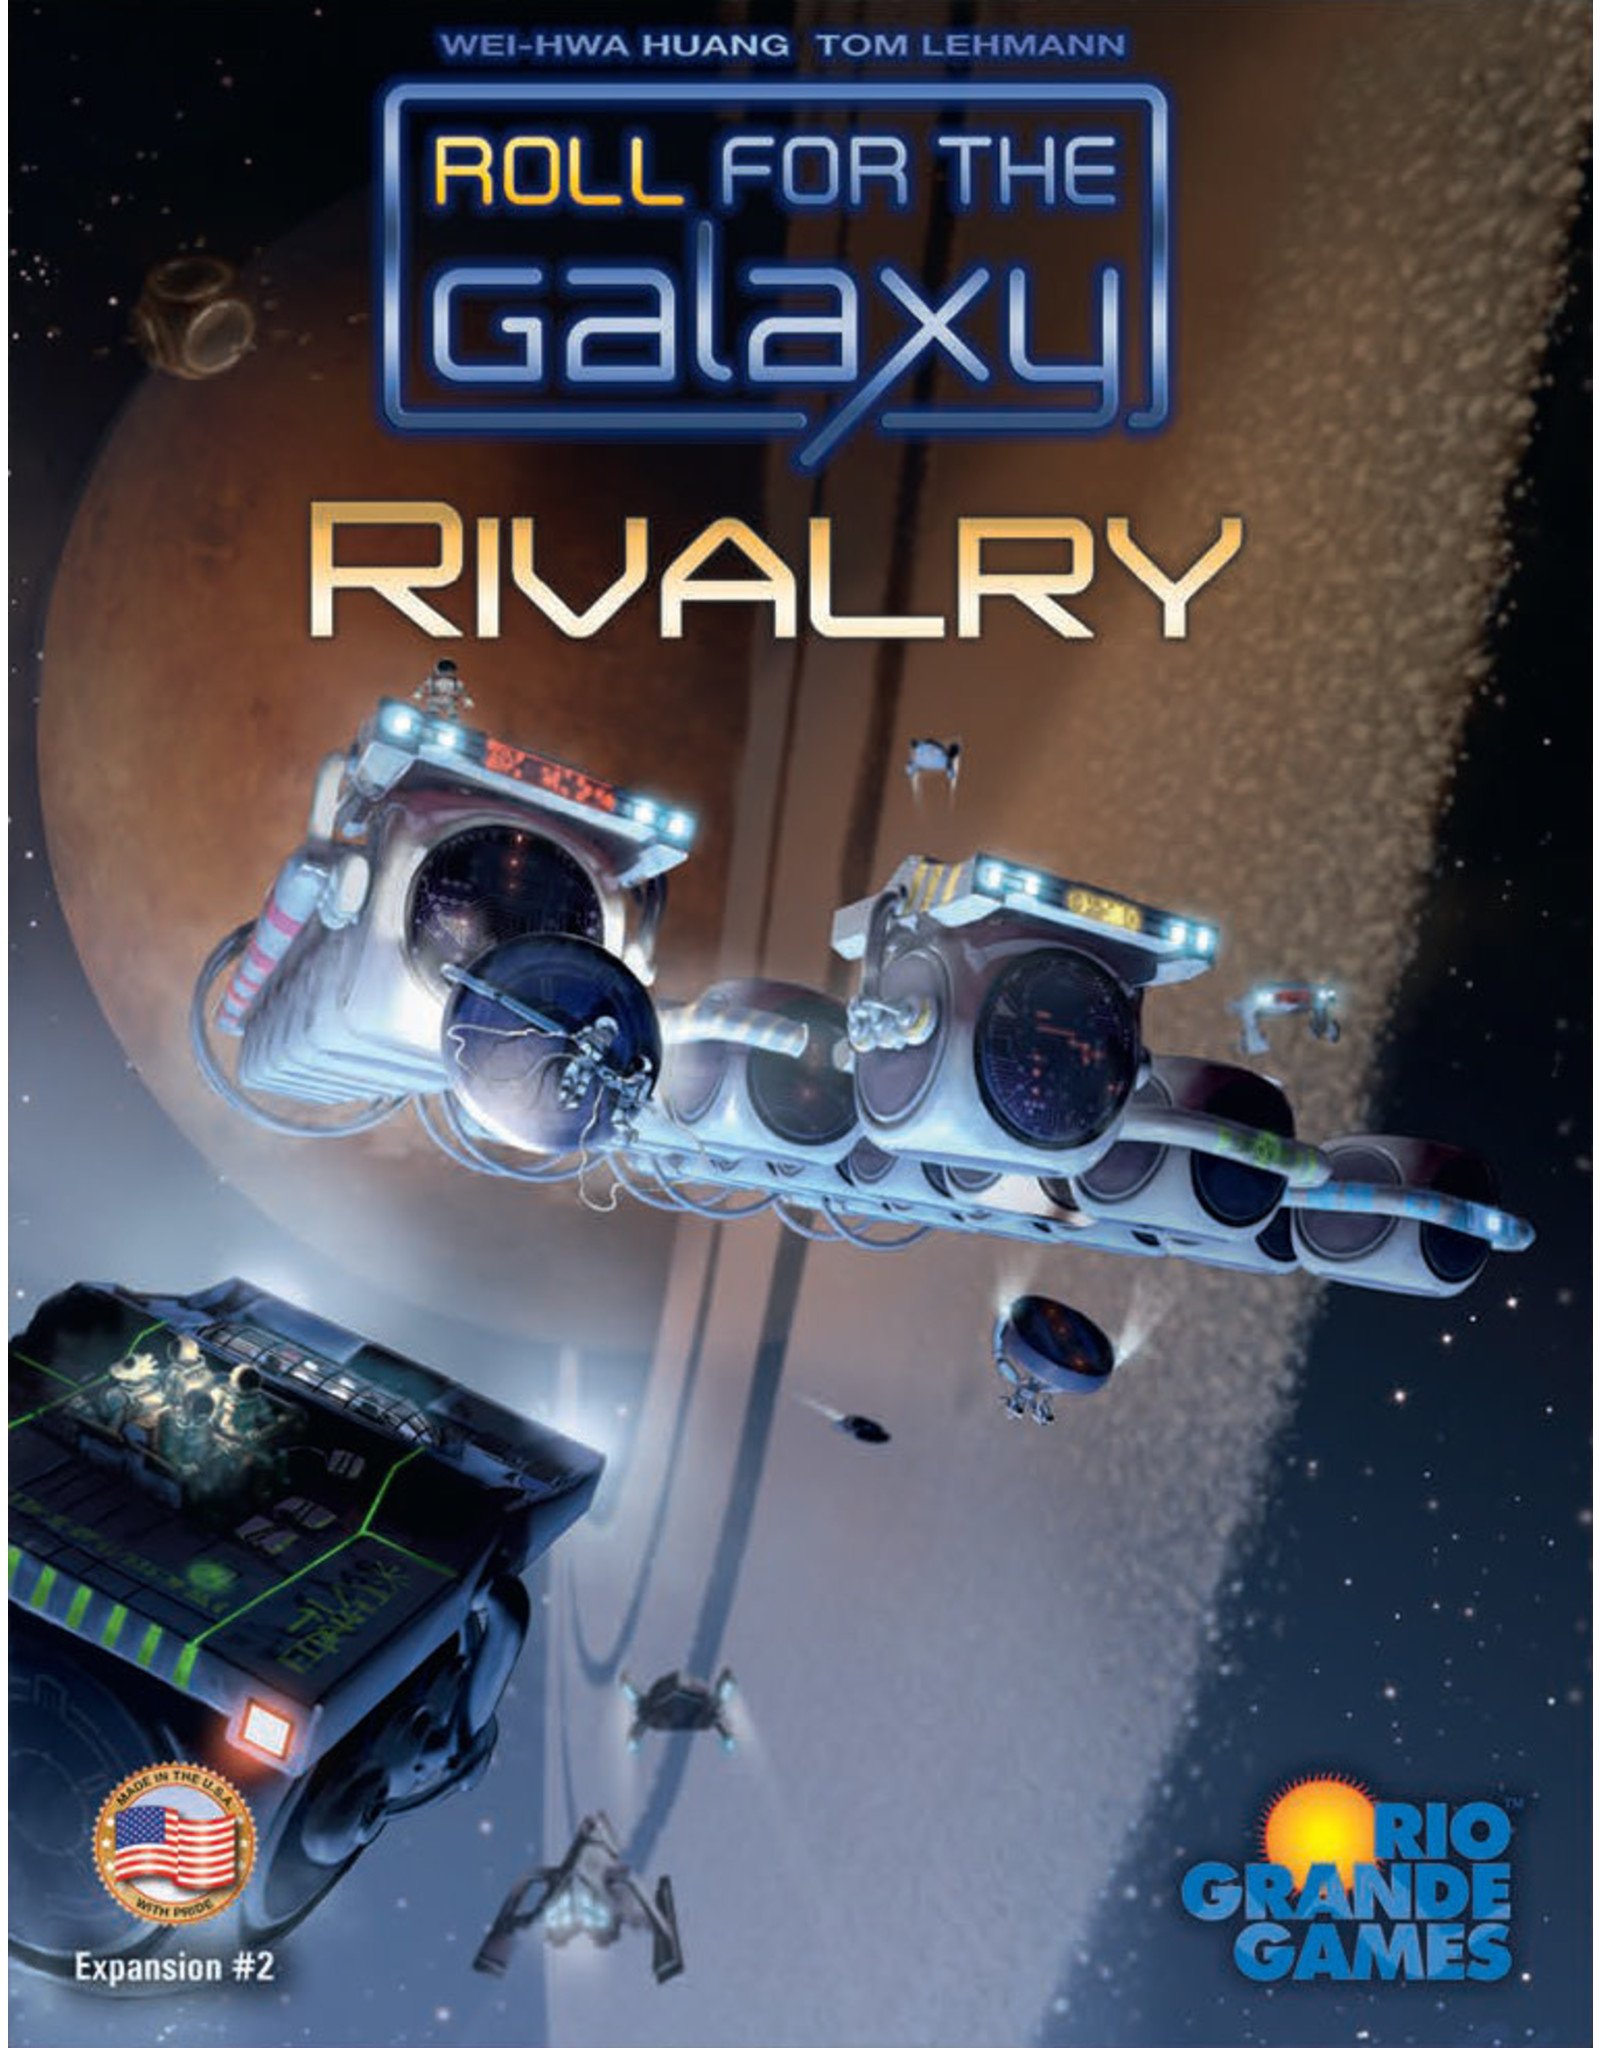 Roll for the Galaxy Rivalry